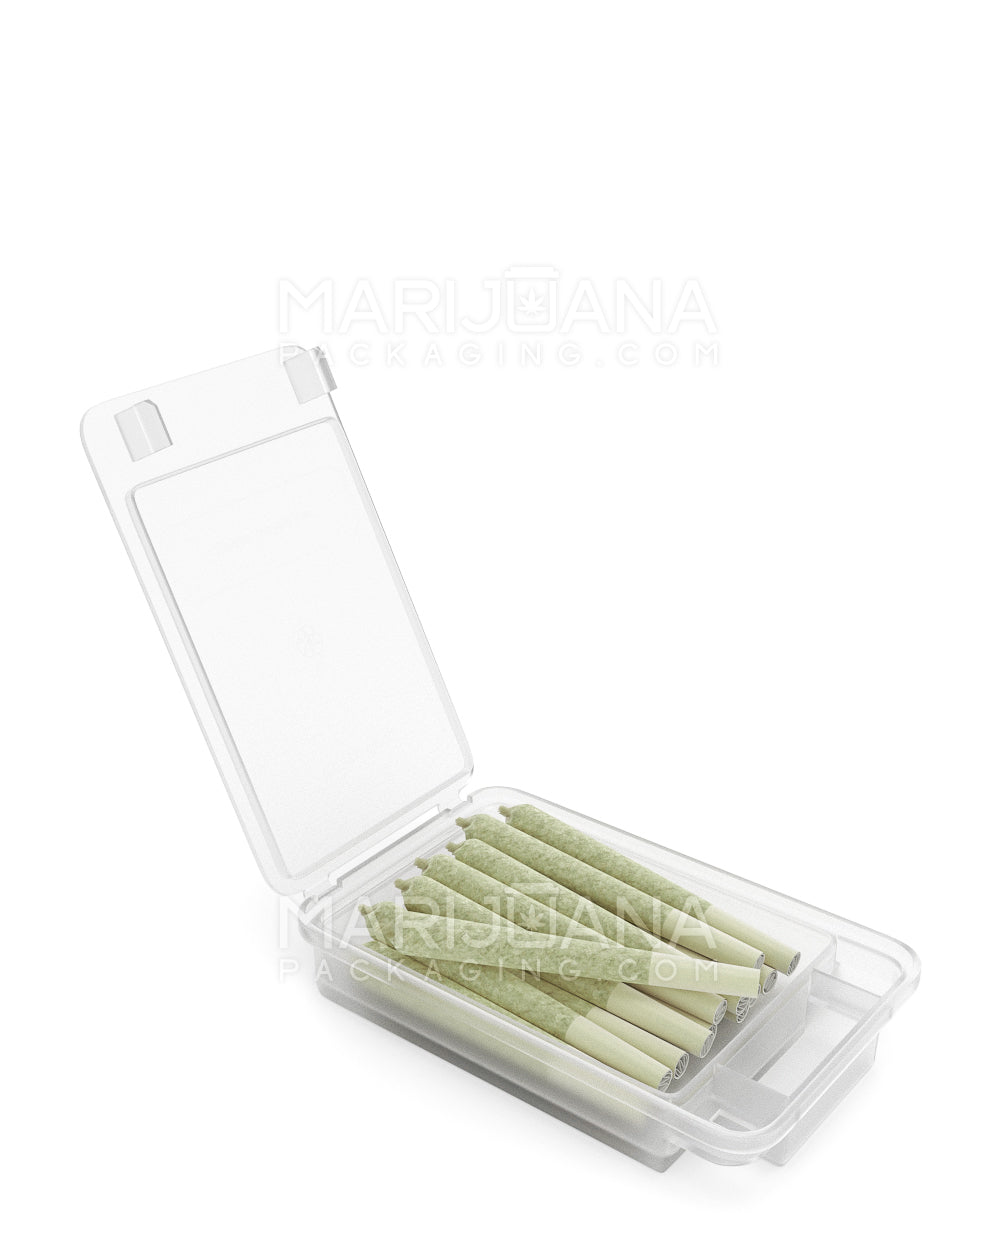 Child Resistant | Snap Box Edible & Pre-Roll Joint Case | Medium - Clear Plastic - 240 Count - 2